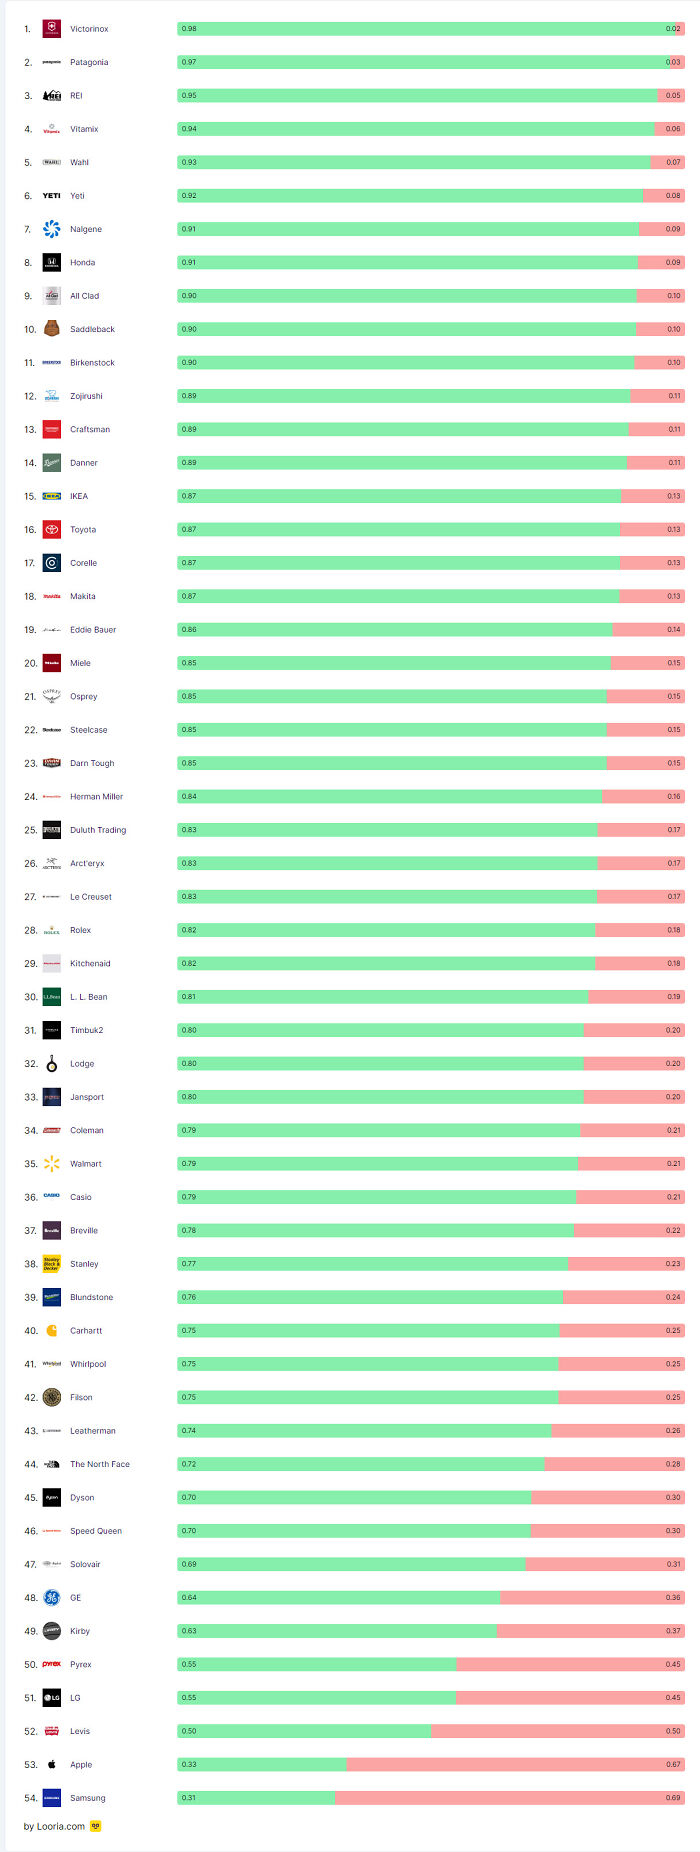 The Most And Least Popular Brands On R/Buyitforlife